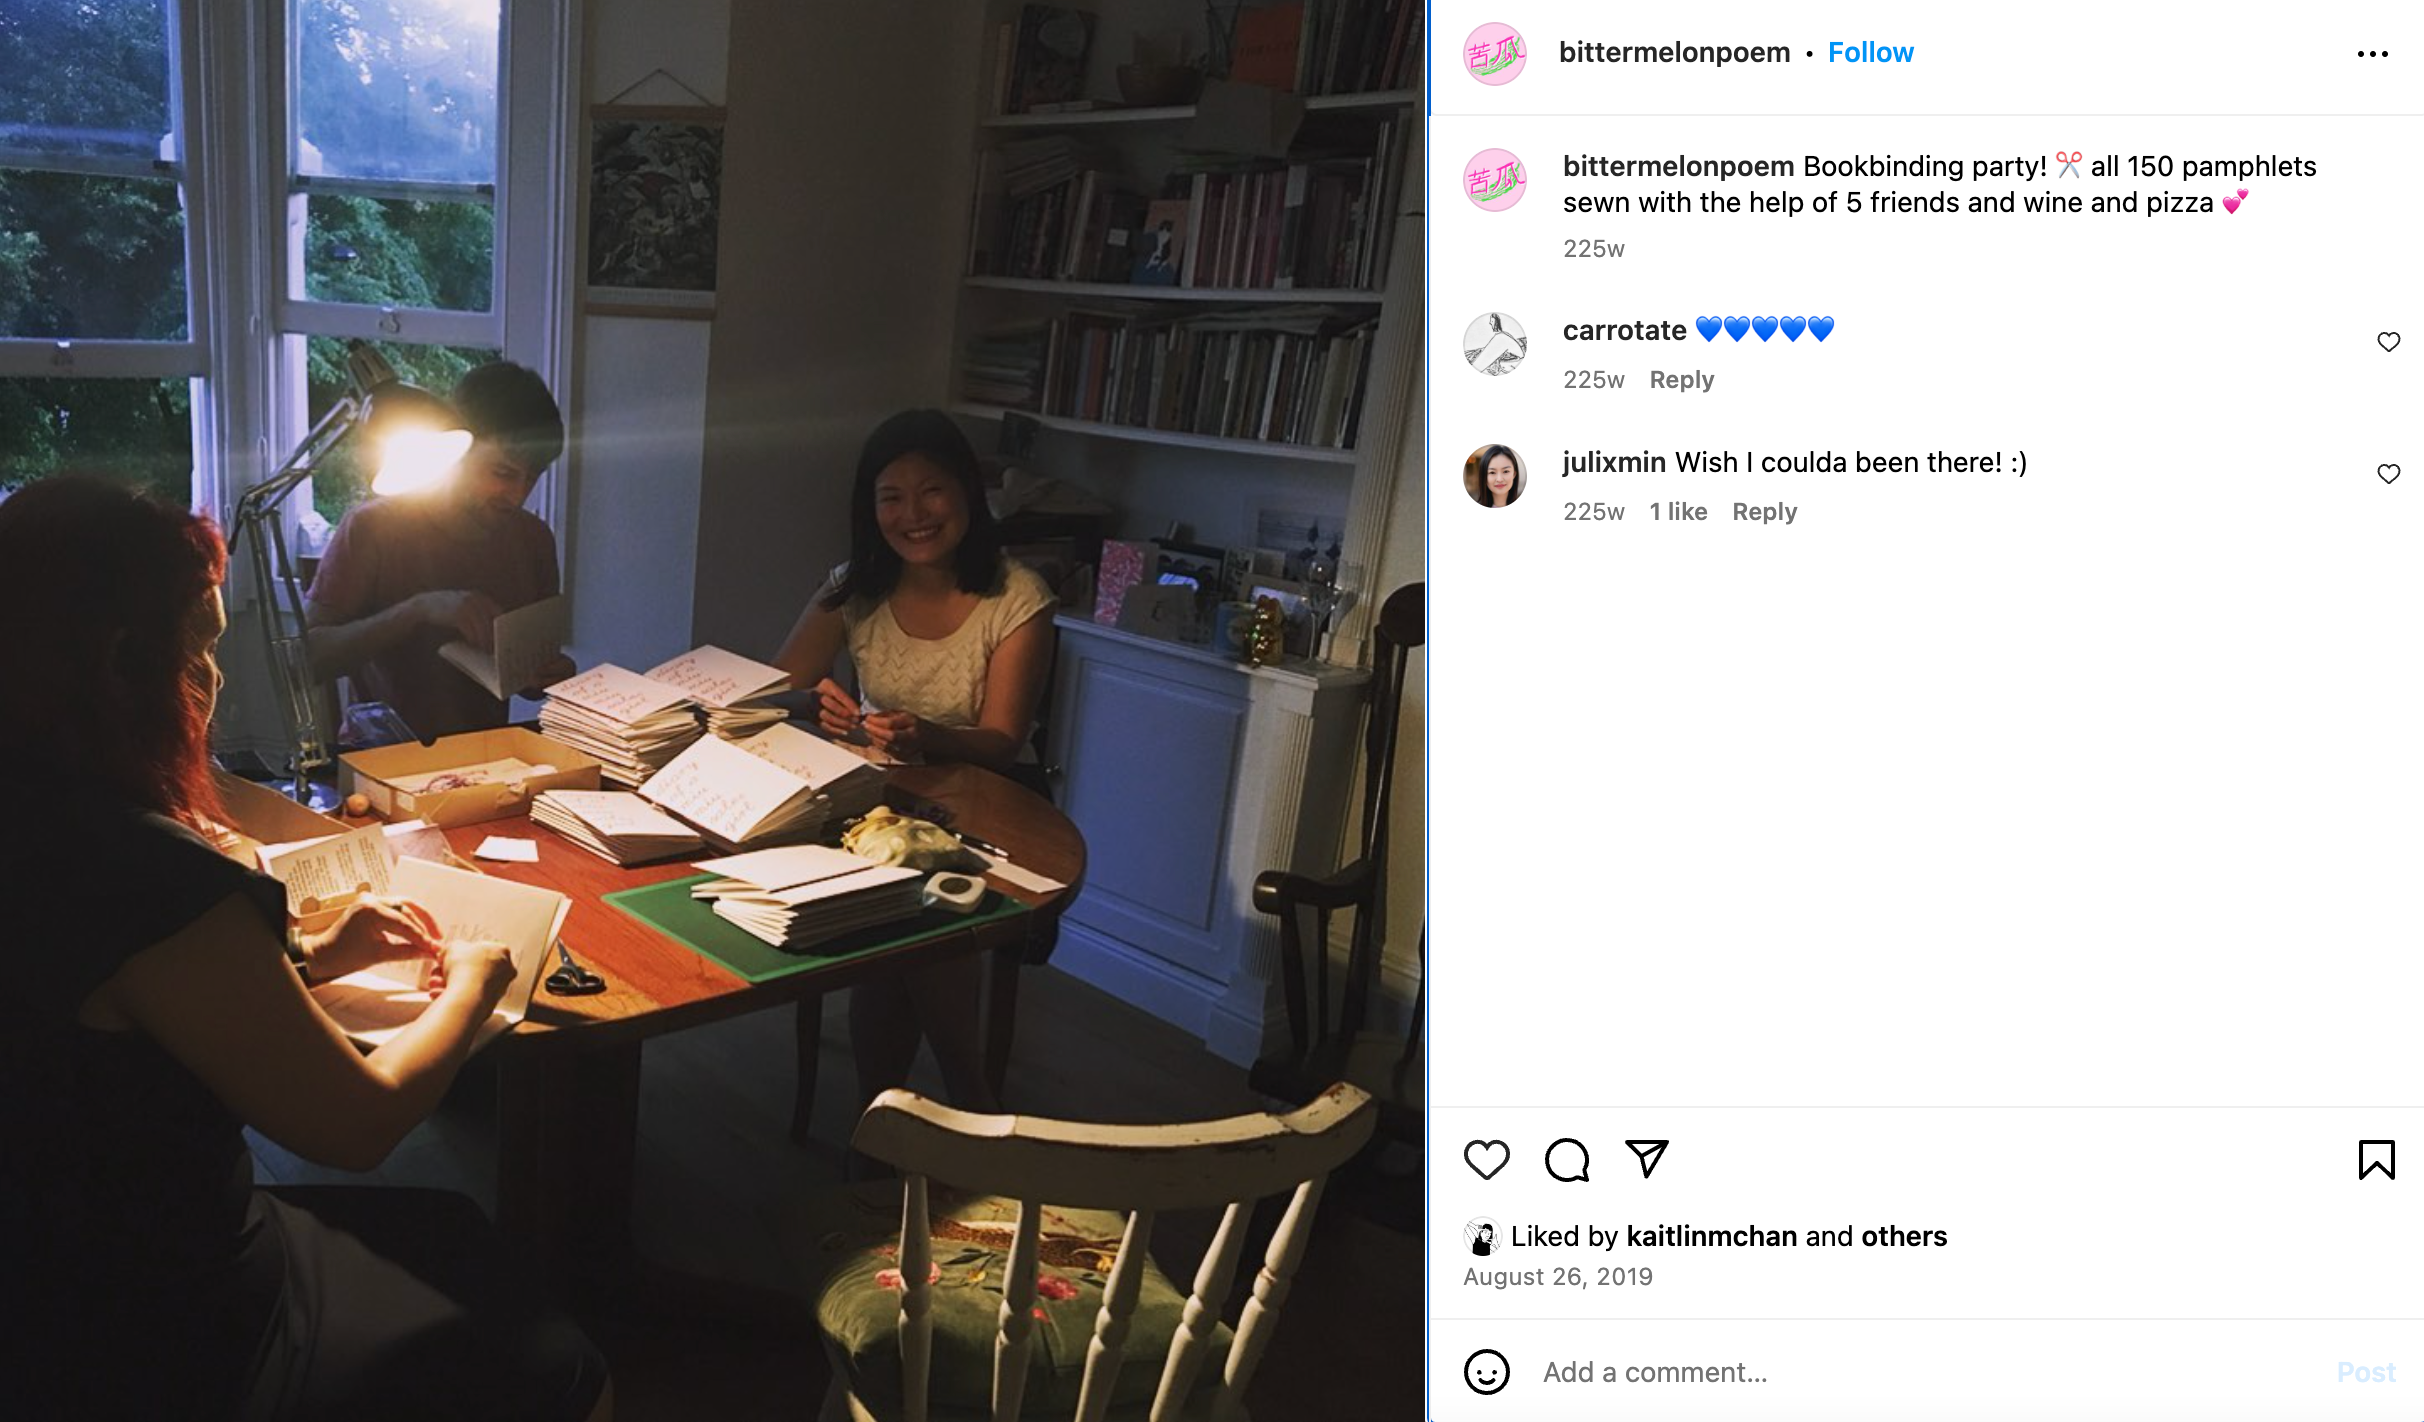 A photo of three people smiling and binding zines with a stack of pages on the table in front of them.